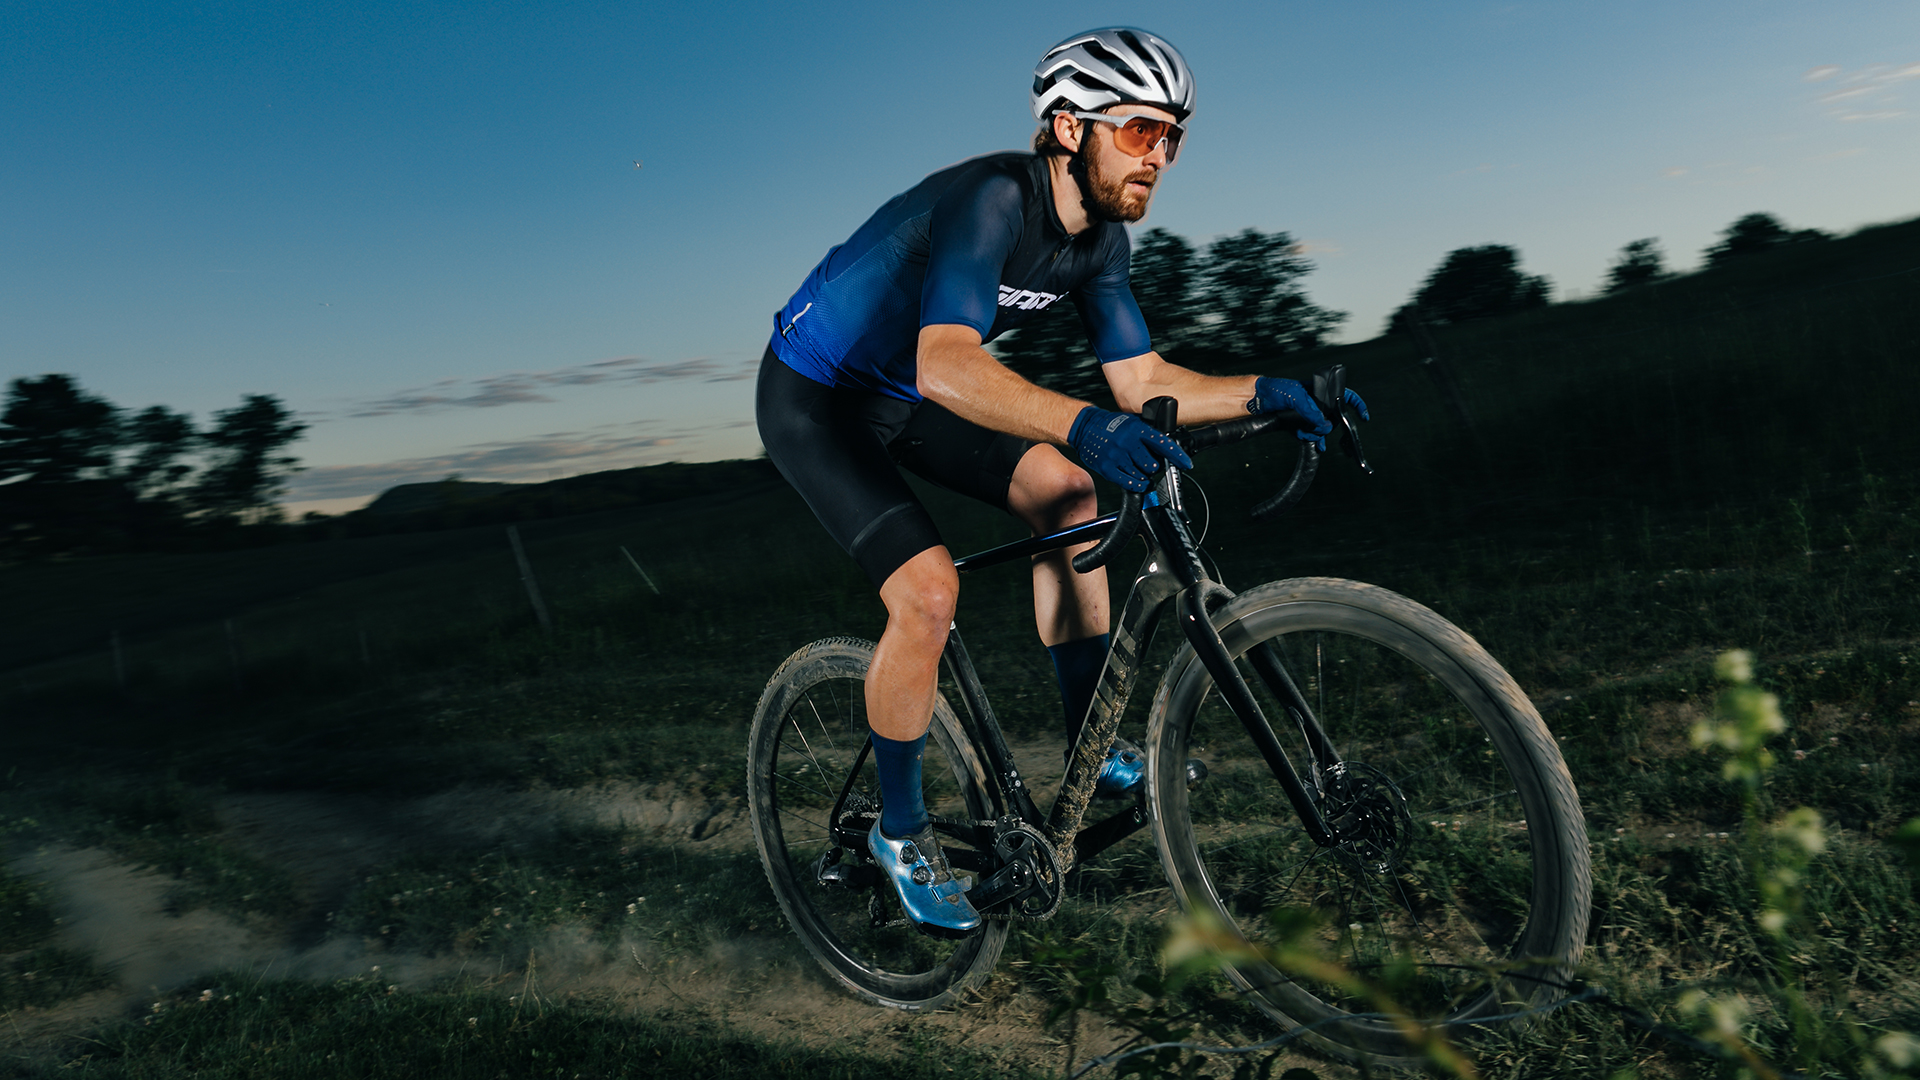 Conquer All Conditions: The All-New TCX Advanced Pro